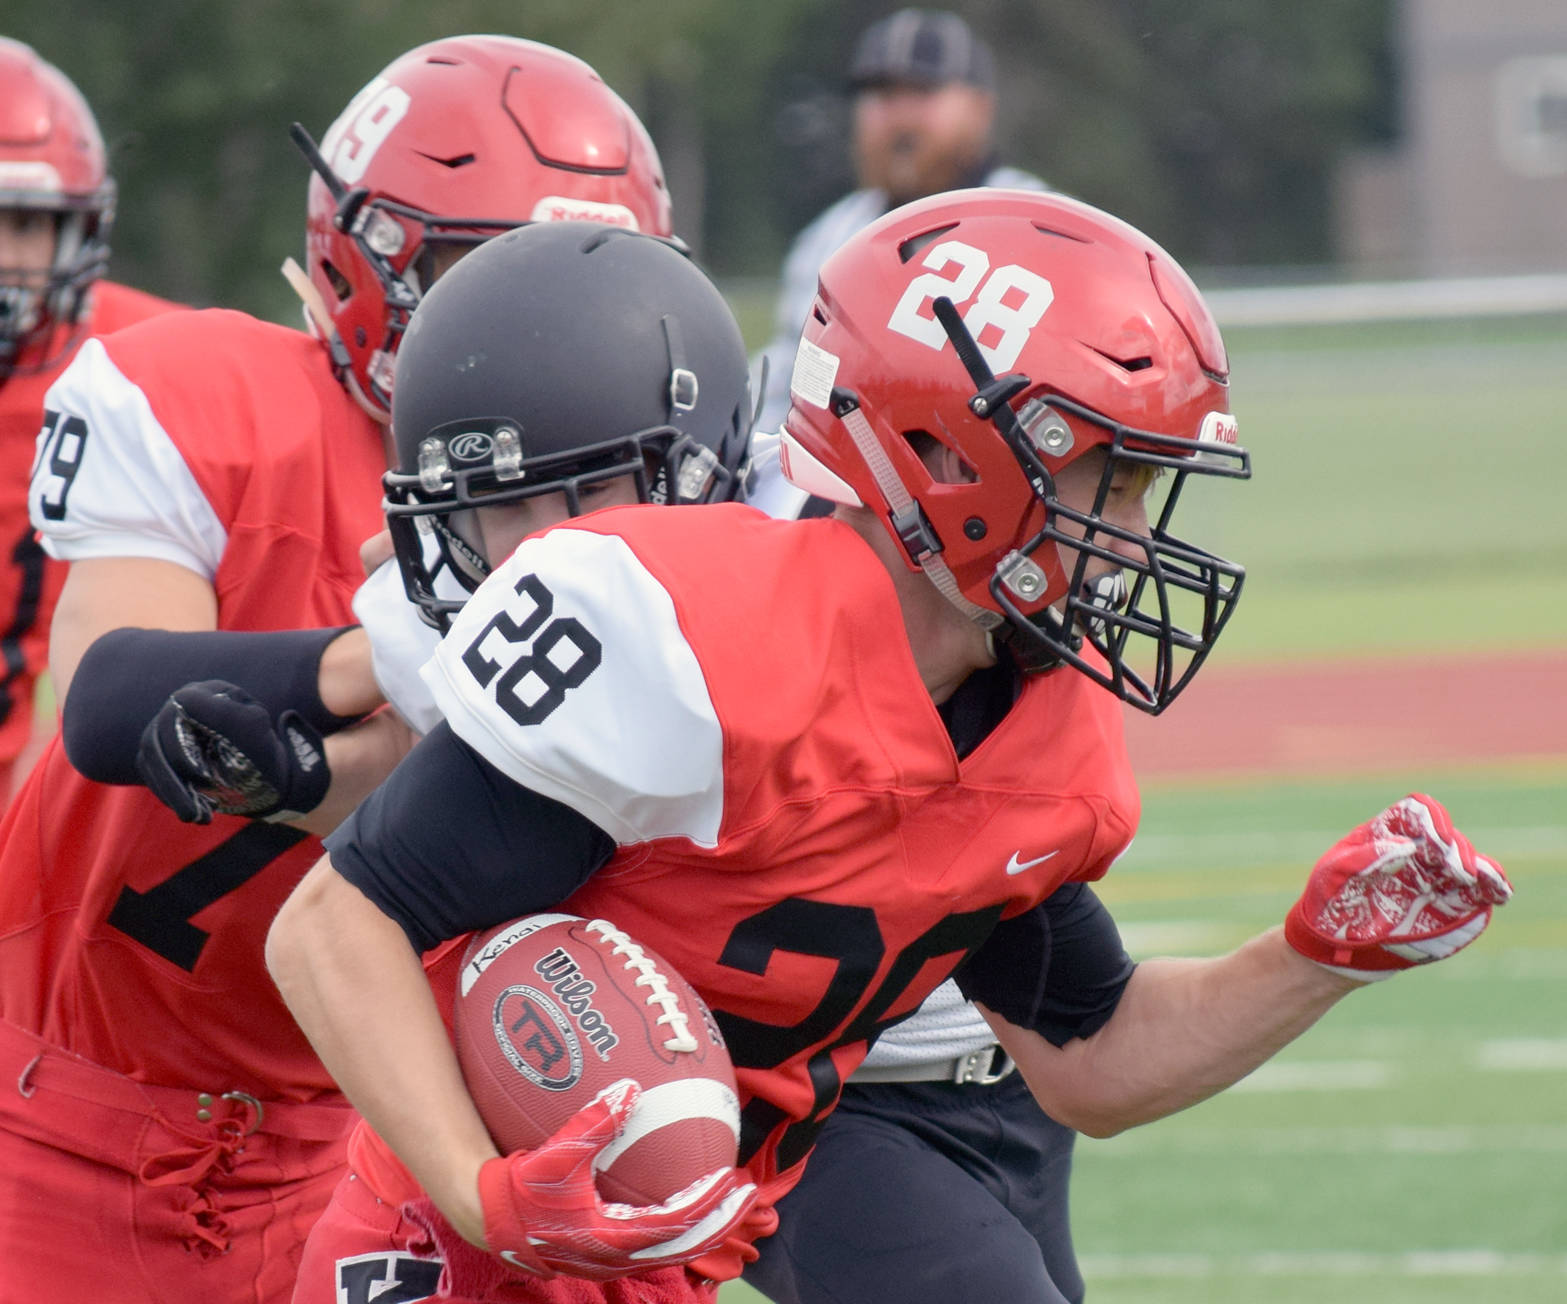 Kenai Central’s Rykker Riddall tries to elude the tackle of Nikiski’s Sam Berry during a scrimmage at Ed Hollier Field in Kenai on Friday, Aug. 11, 2017. (Photo by Jeff Helminiak/Peninsula Clarion)